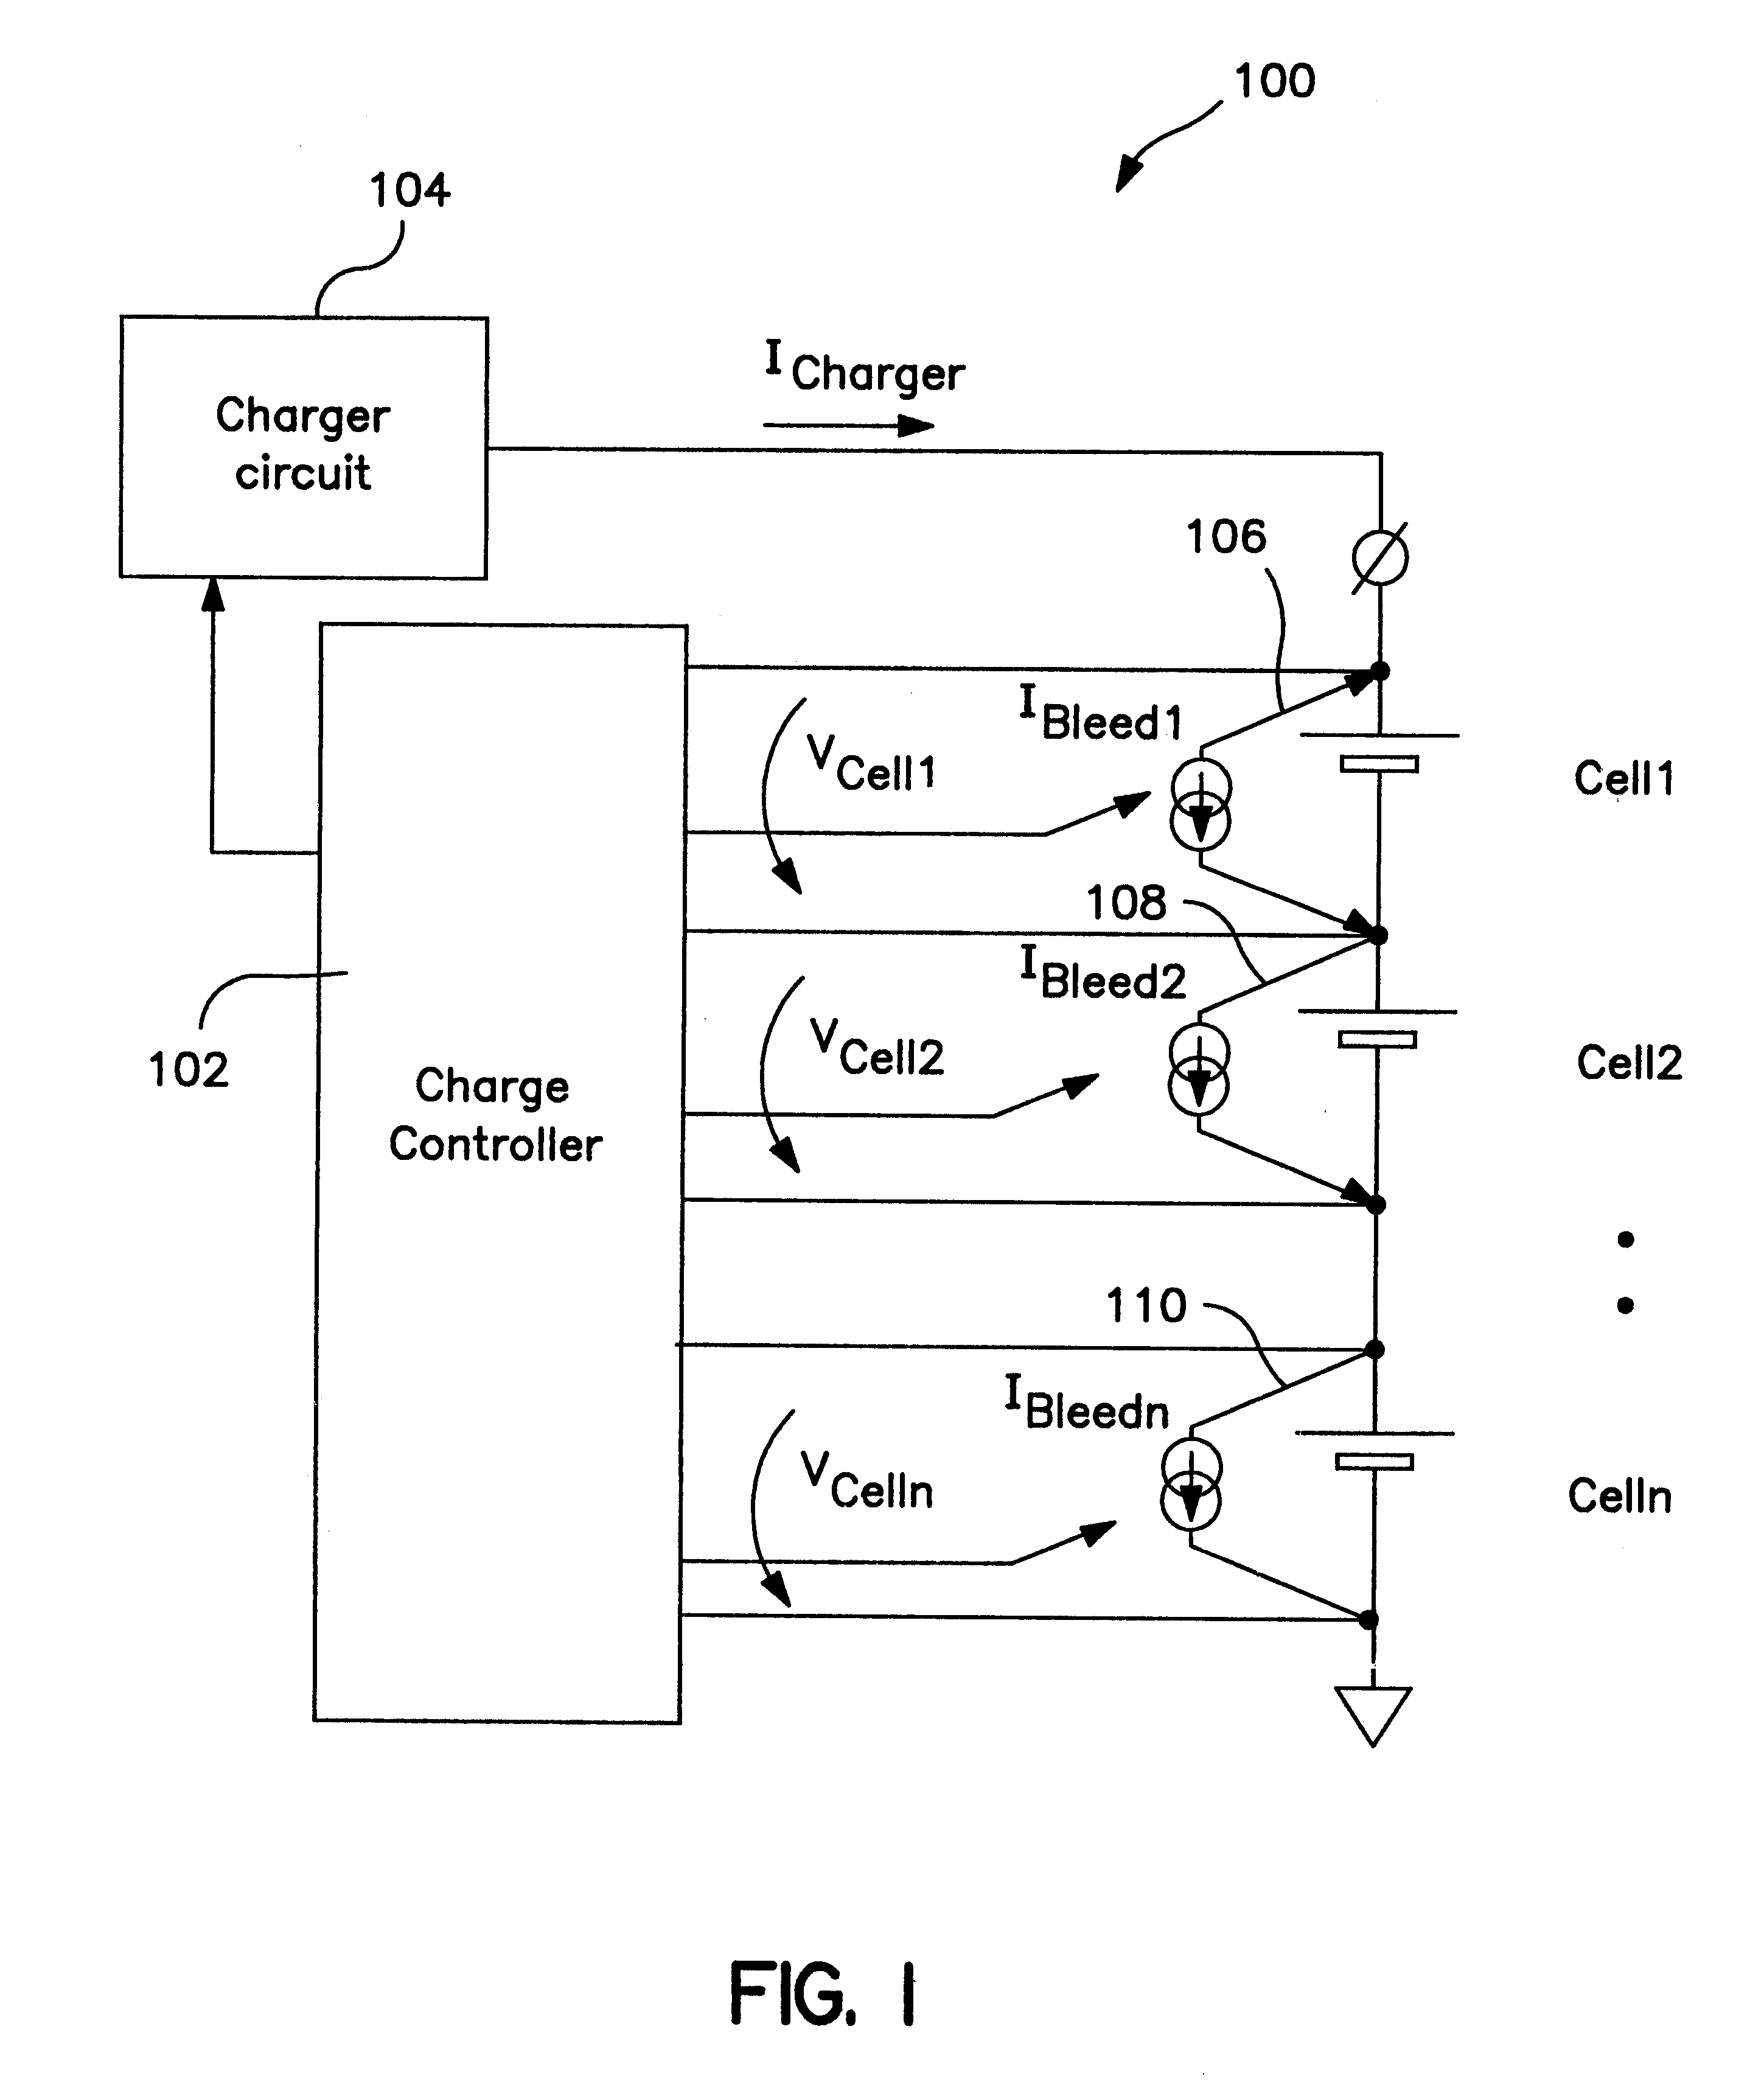 Battery cell charging system having voltage threshold and bleeder current generating circuits